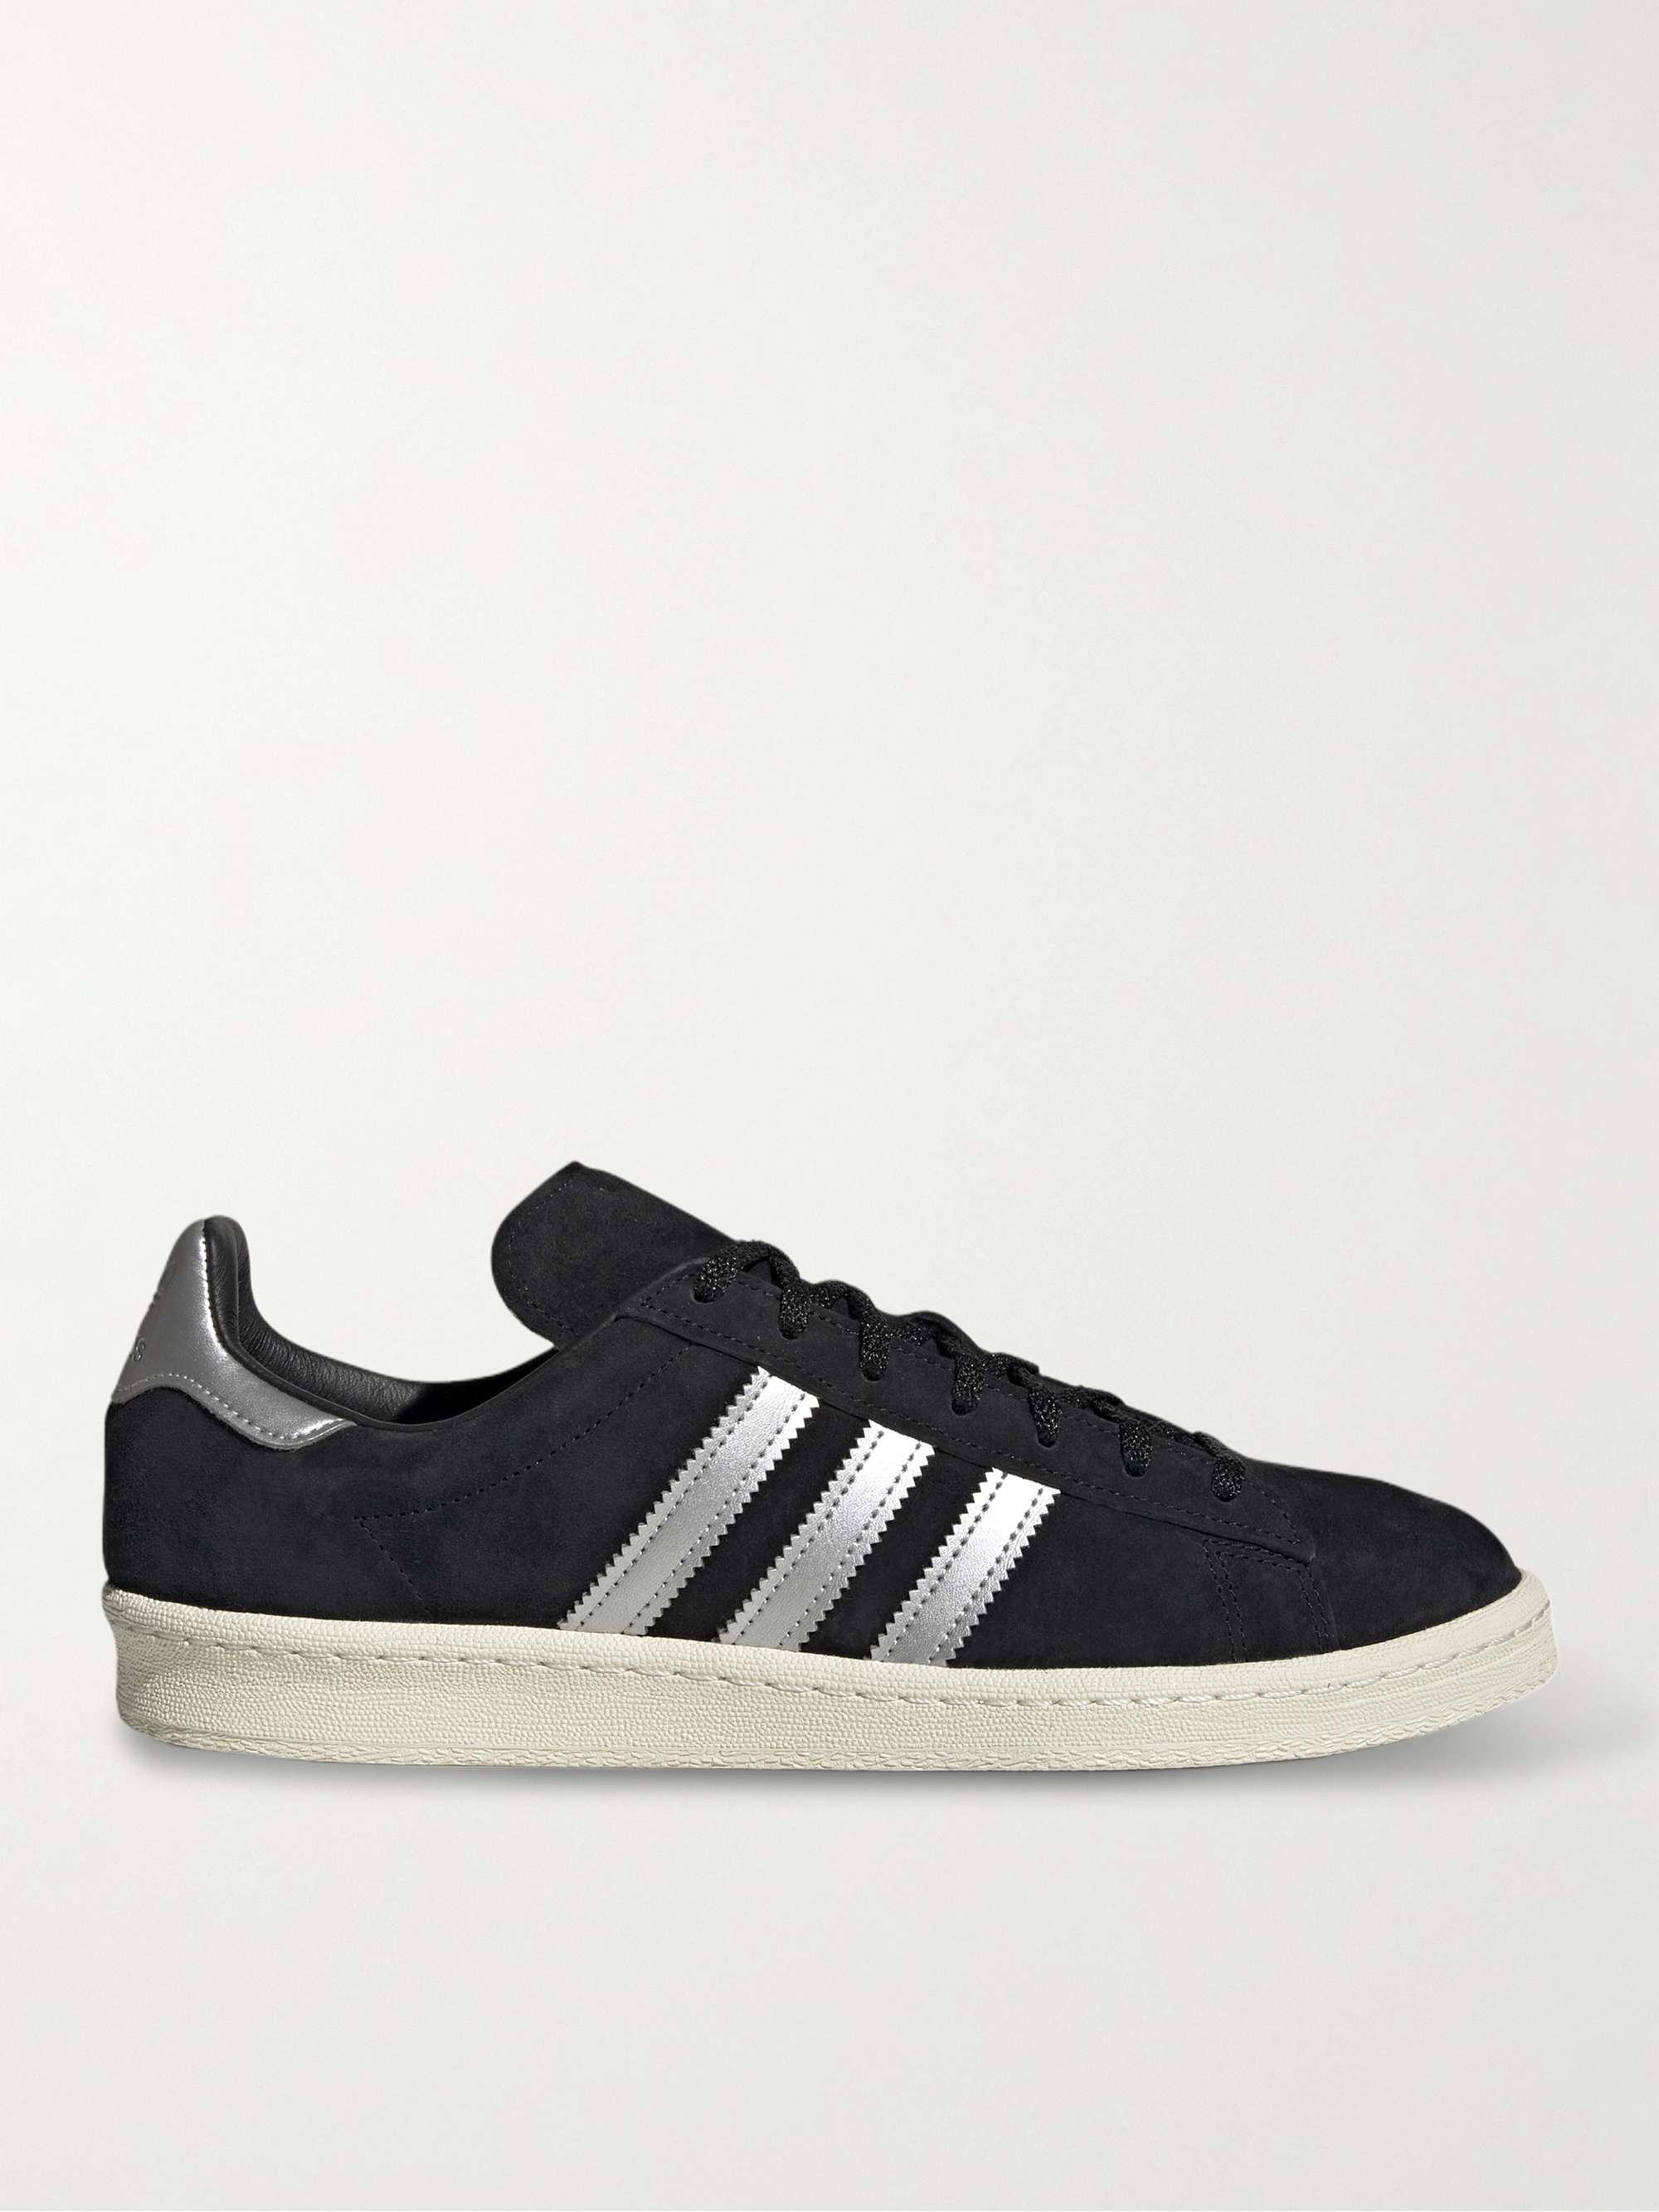 ADIDAS ORIGINALS Campus 80s Leather-Trimmed Suede Sneakers for Men | MR ...